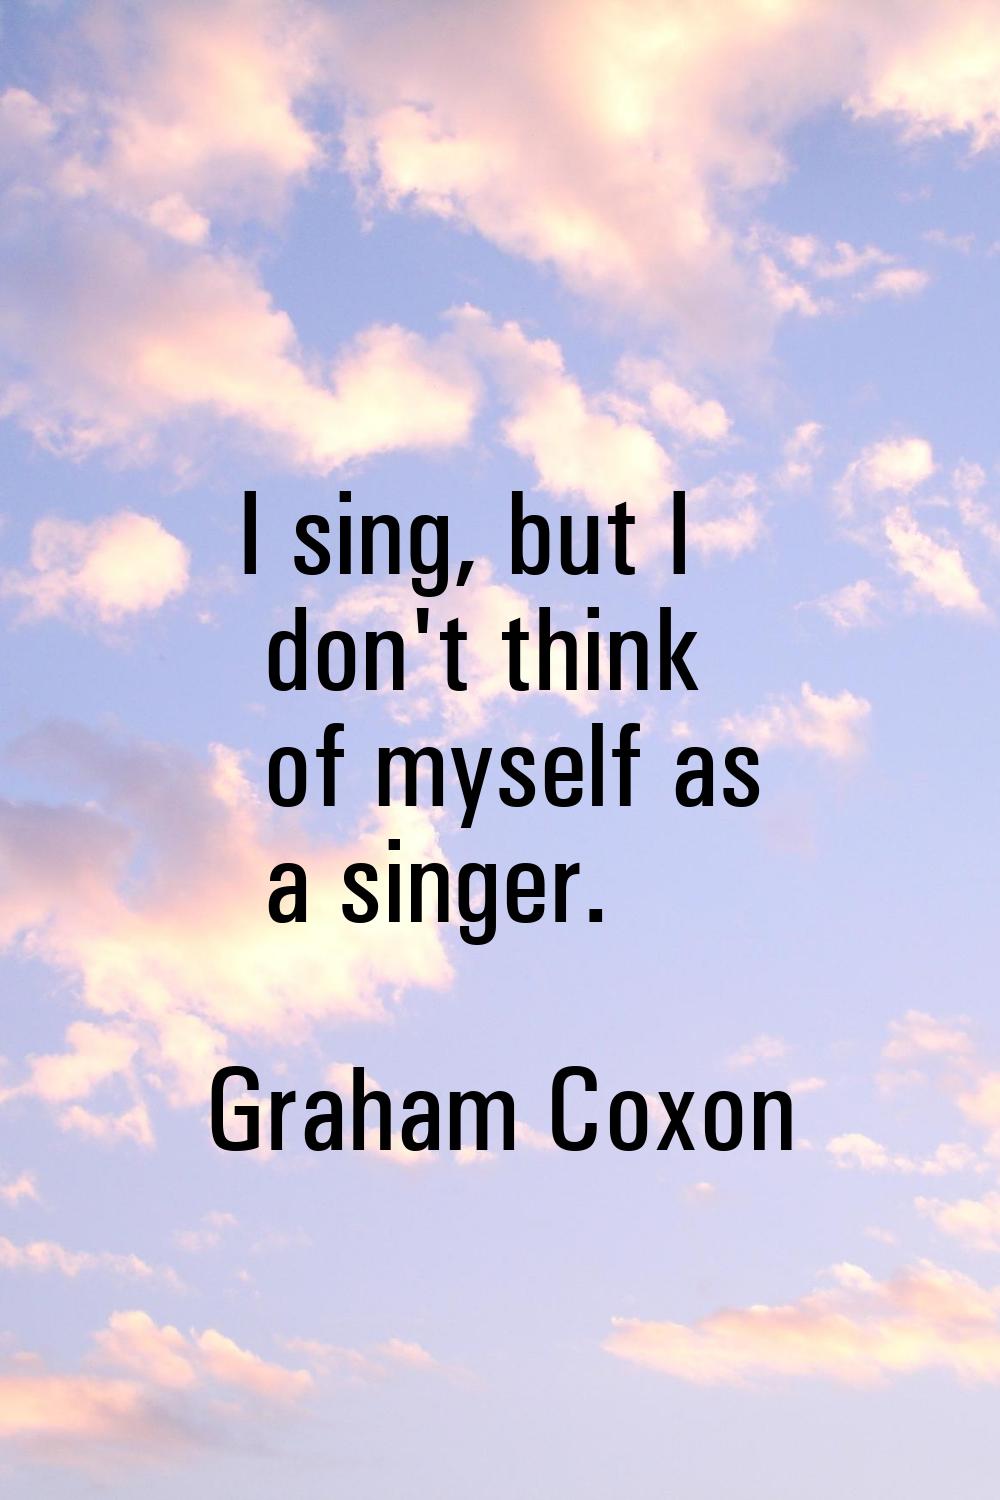 I sing, but I don't think of myself as a singer.